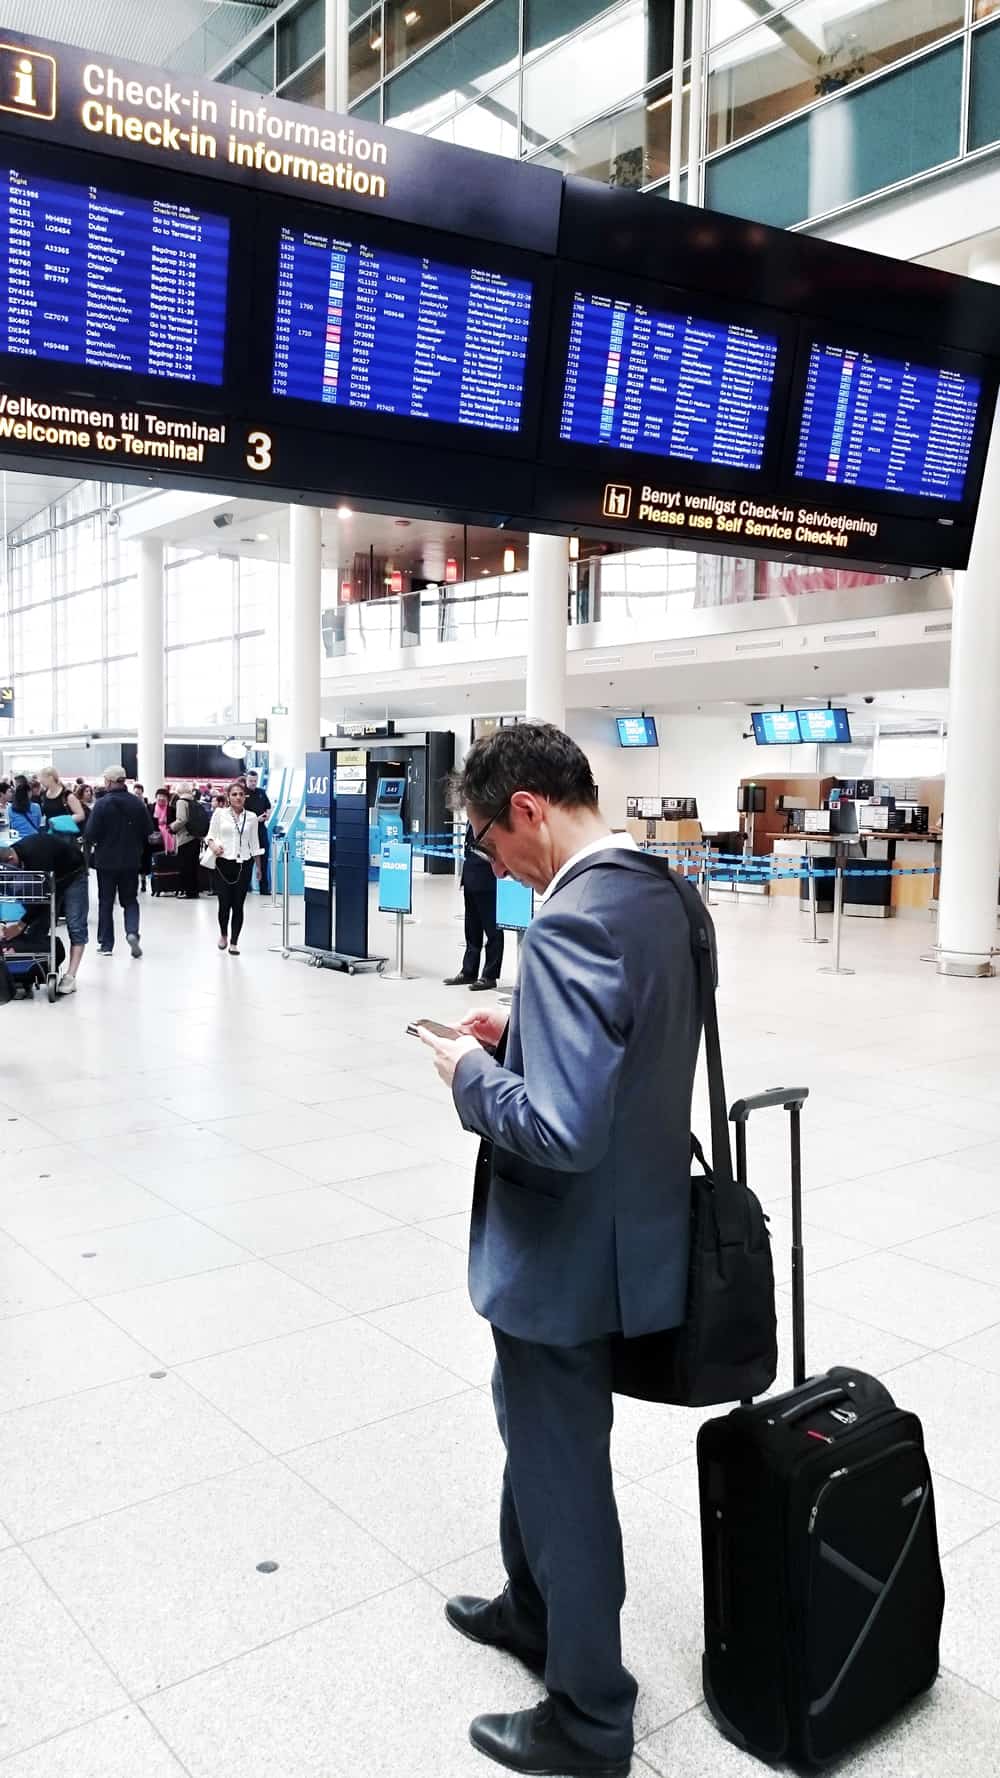 A photo of a man in a suit consulting his smartphone in front of a board detailing arrivals and departures at the airport.